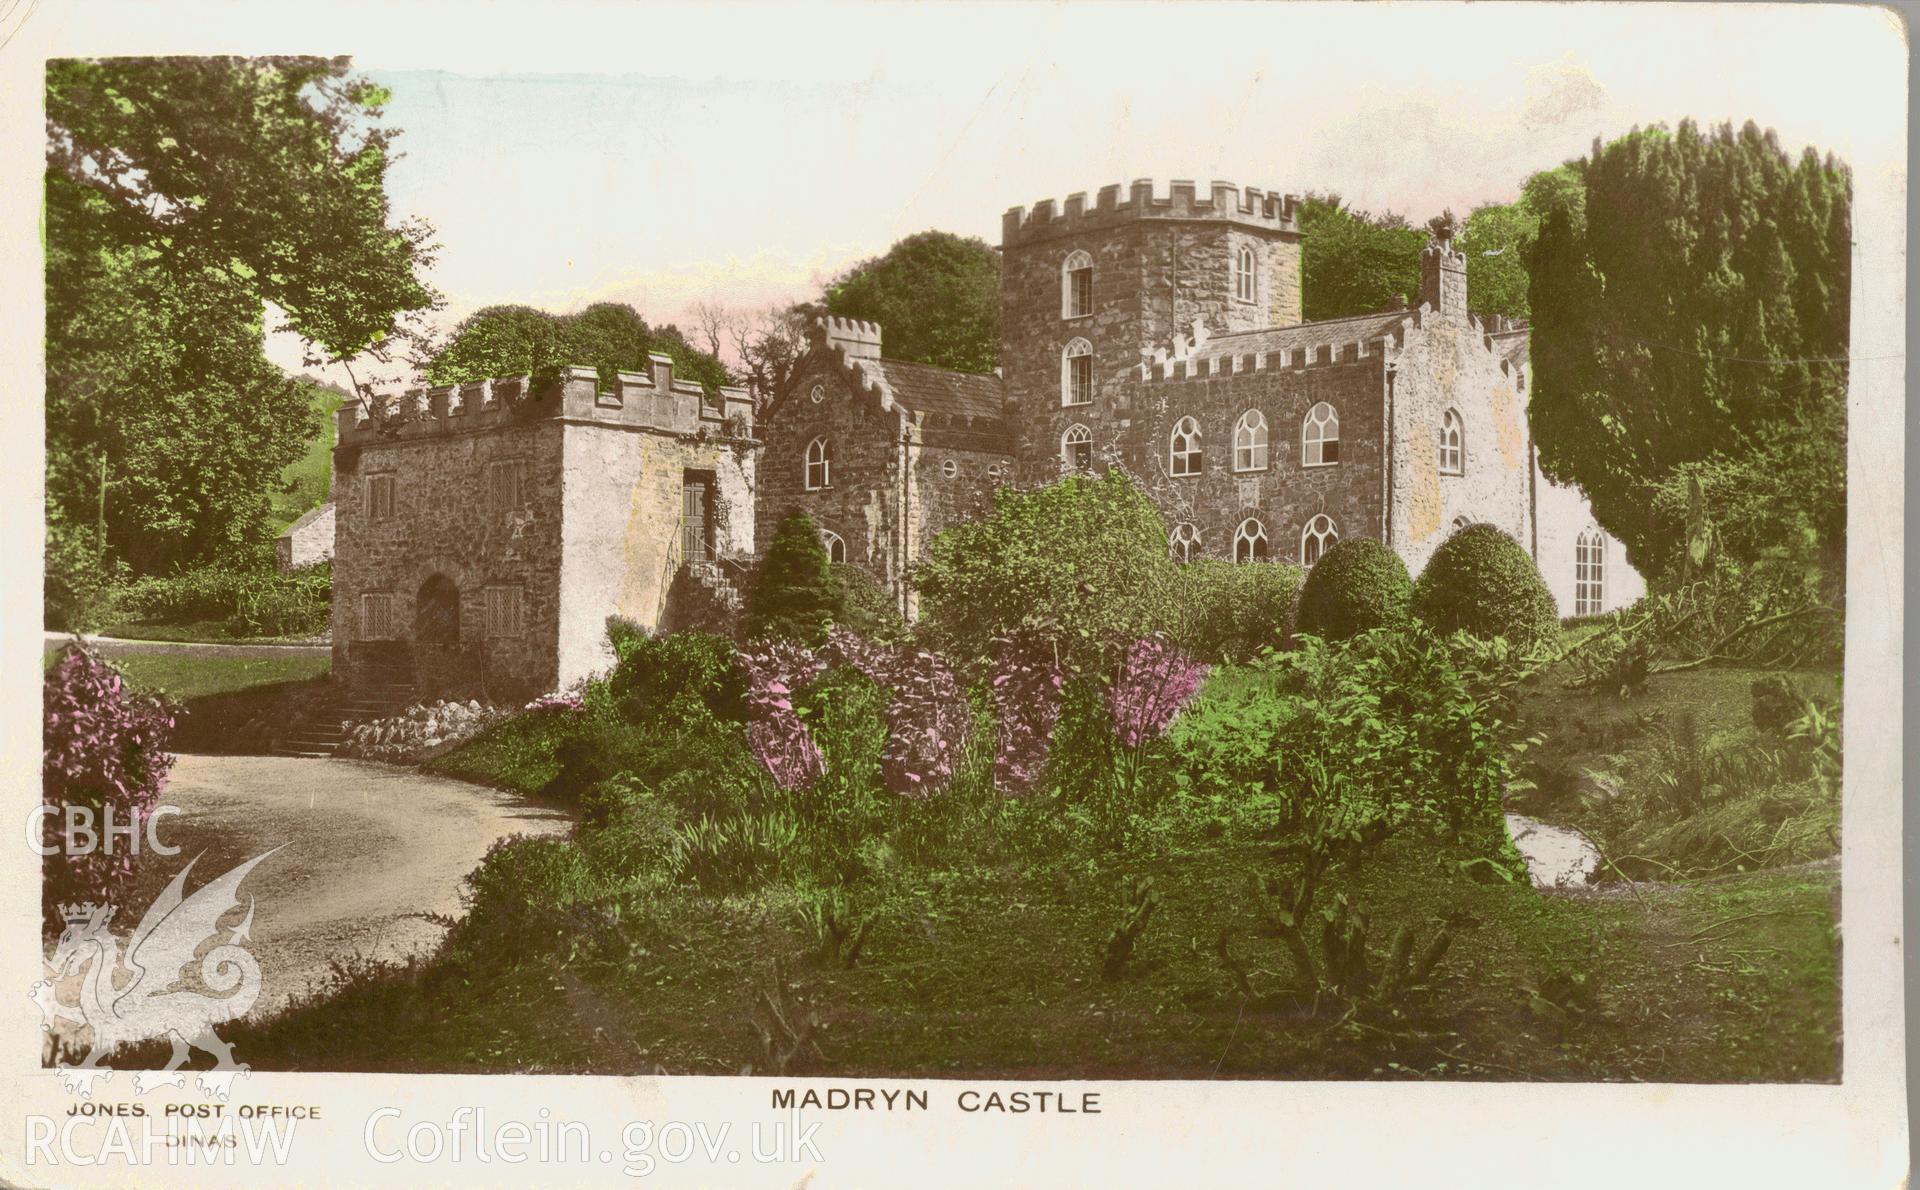 Digitised postcard image of Madryn Castle, Buan, Jones, Post Office, Dinas. Produced by Parks and Gardens Data Services, from an original item in the Peter Davis Collection at Parks and Gardens UK. We hold only web-resolution images of this collection, suitable for viewing on screen and for research purposes only. We do not hold the original images, or publication quality scans.